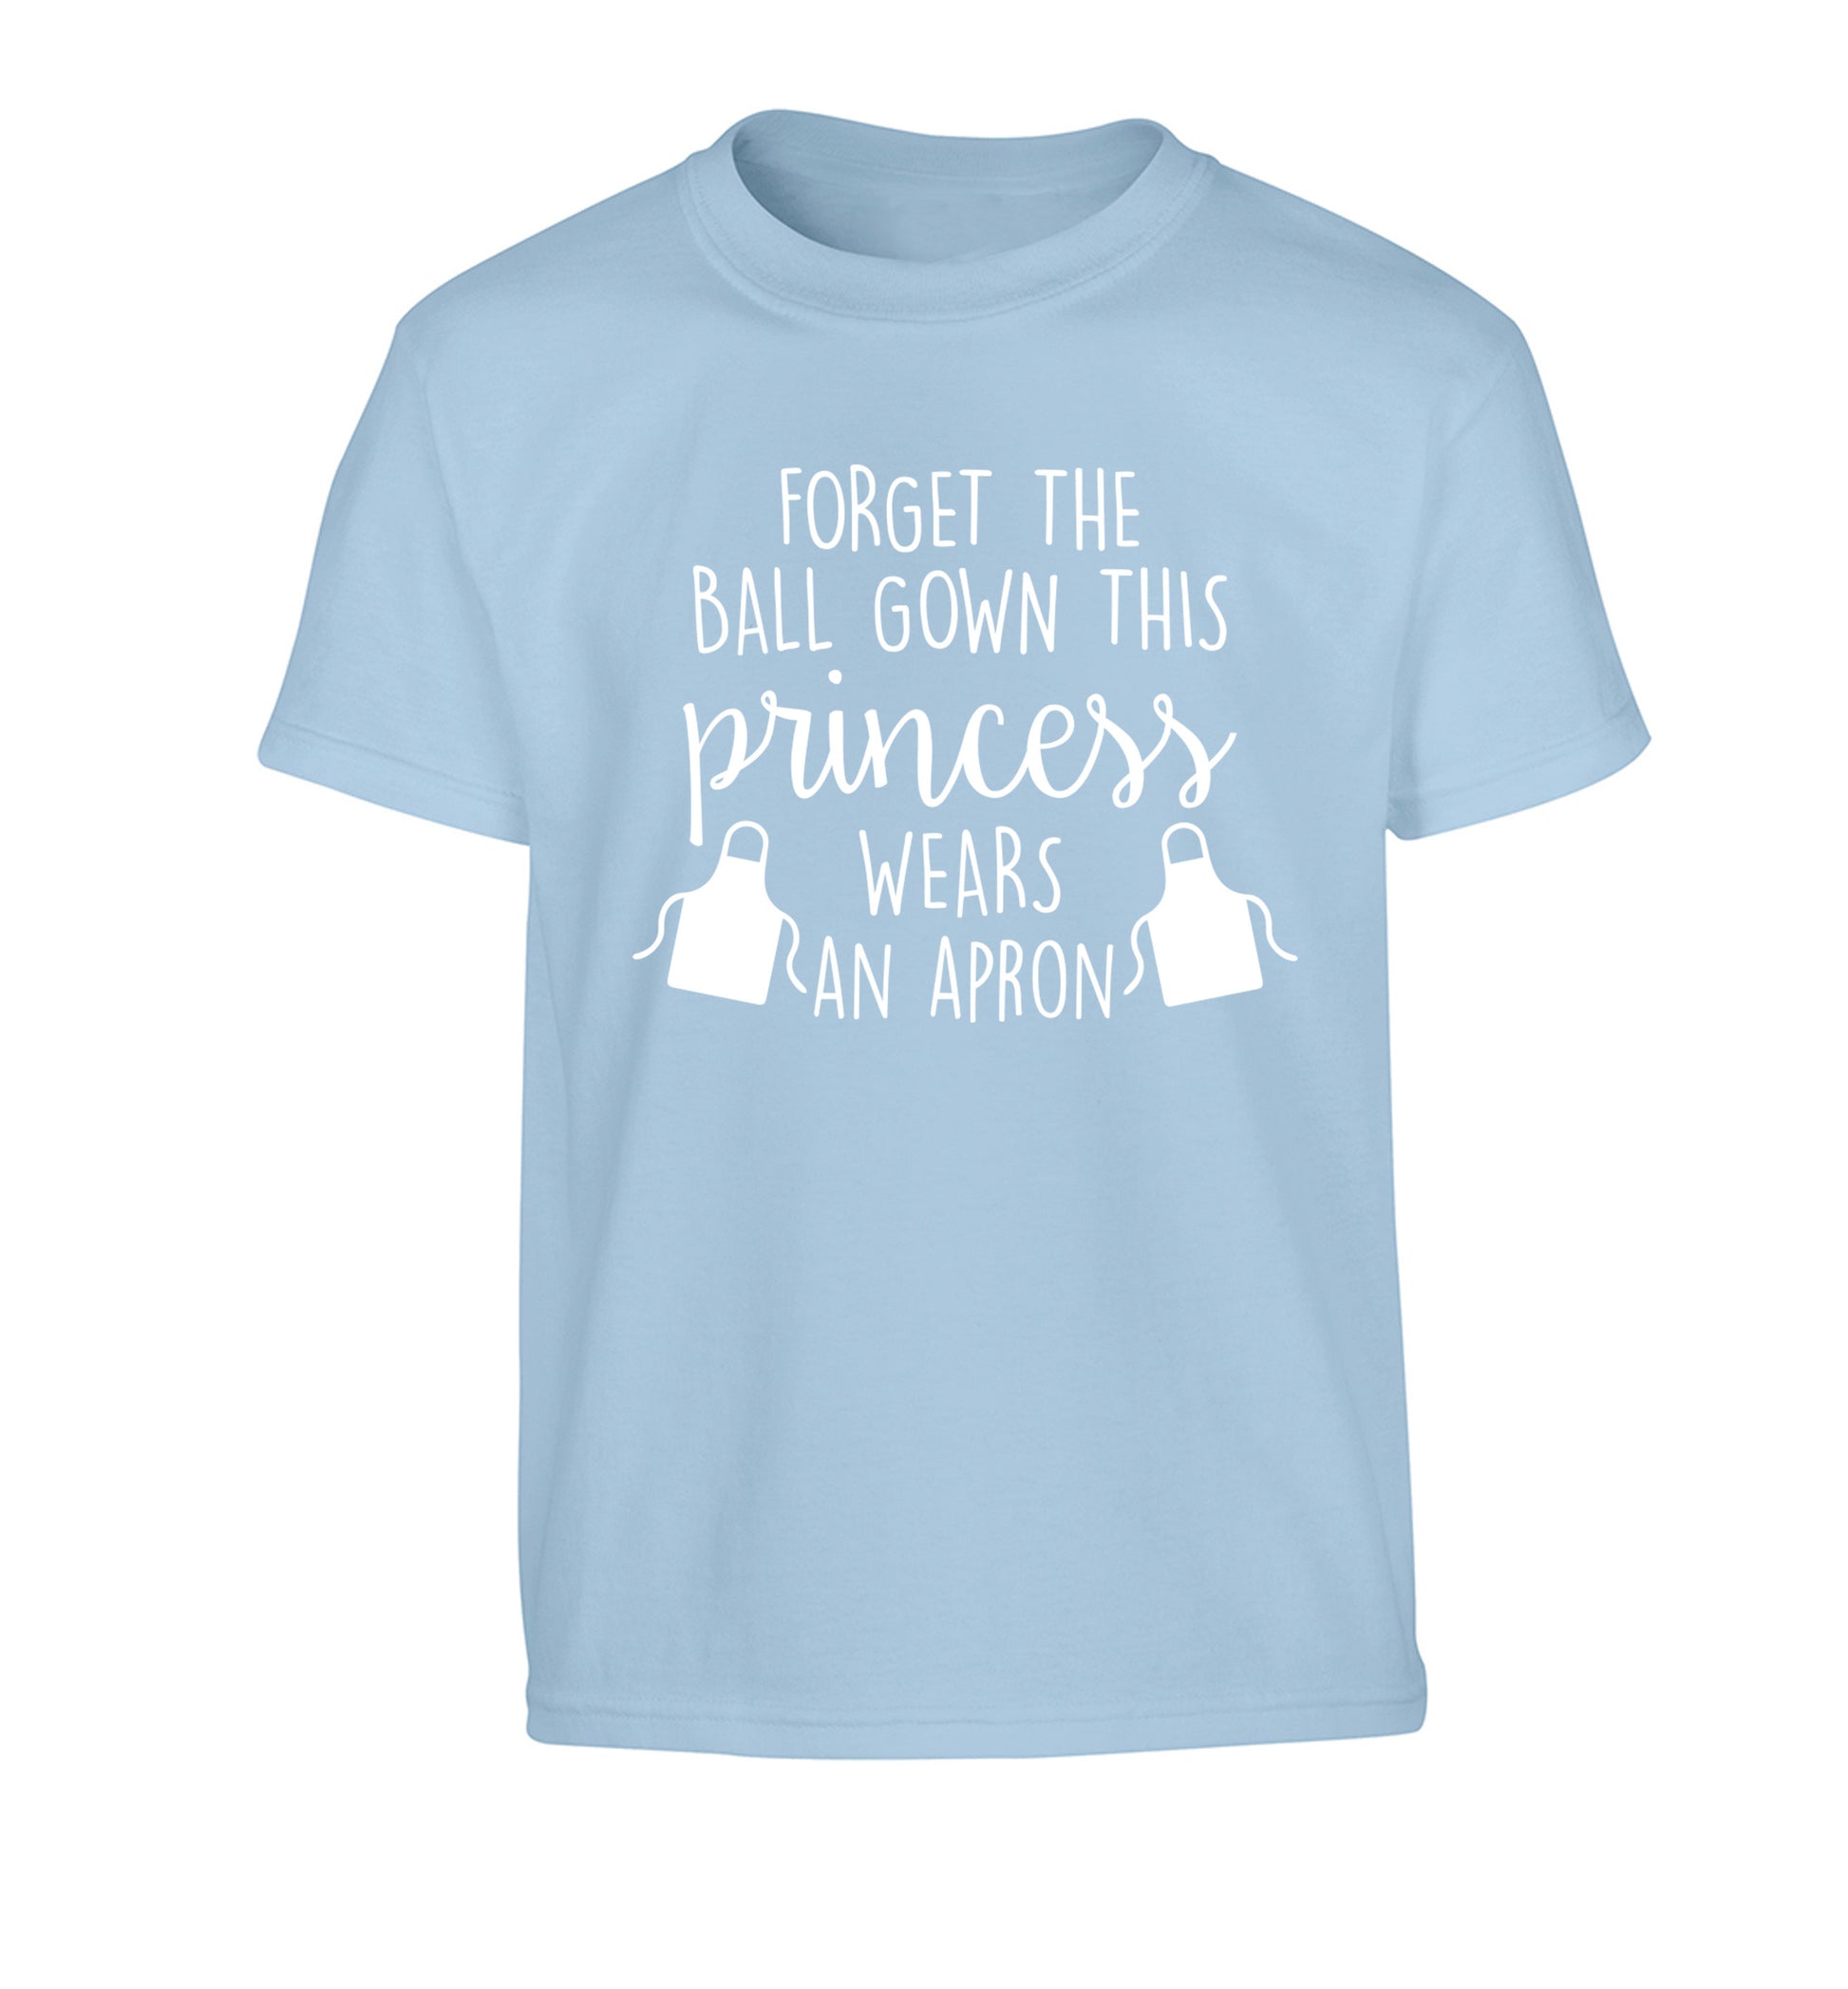 Forget the ball gown this princess wears an apron Children's light blue Tshirt 12-14 Years